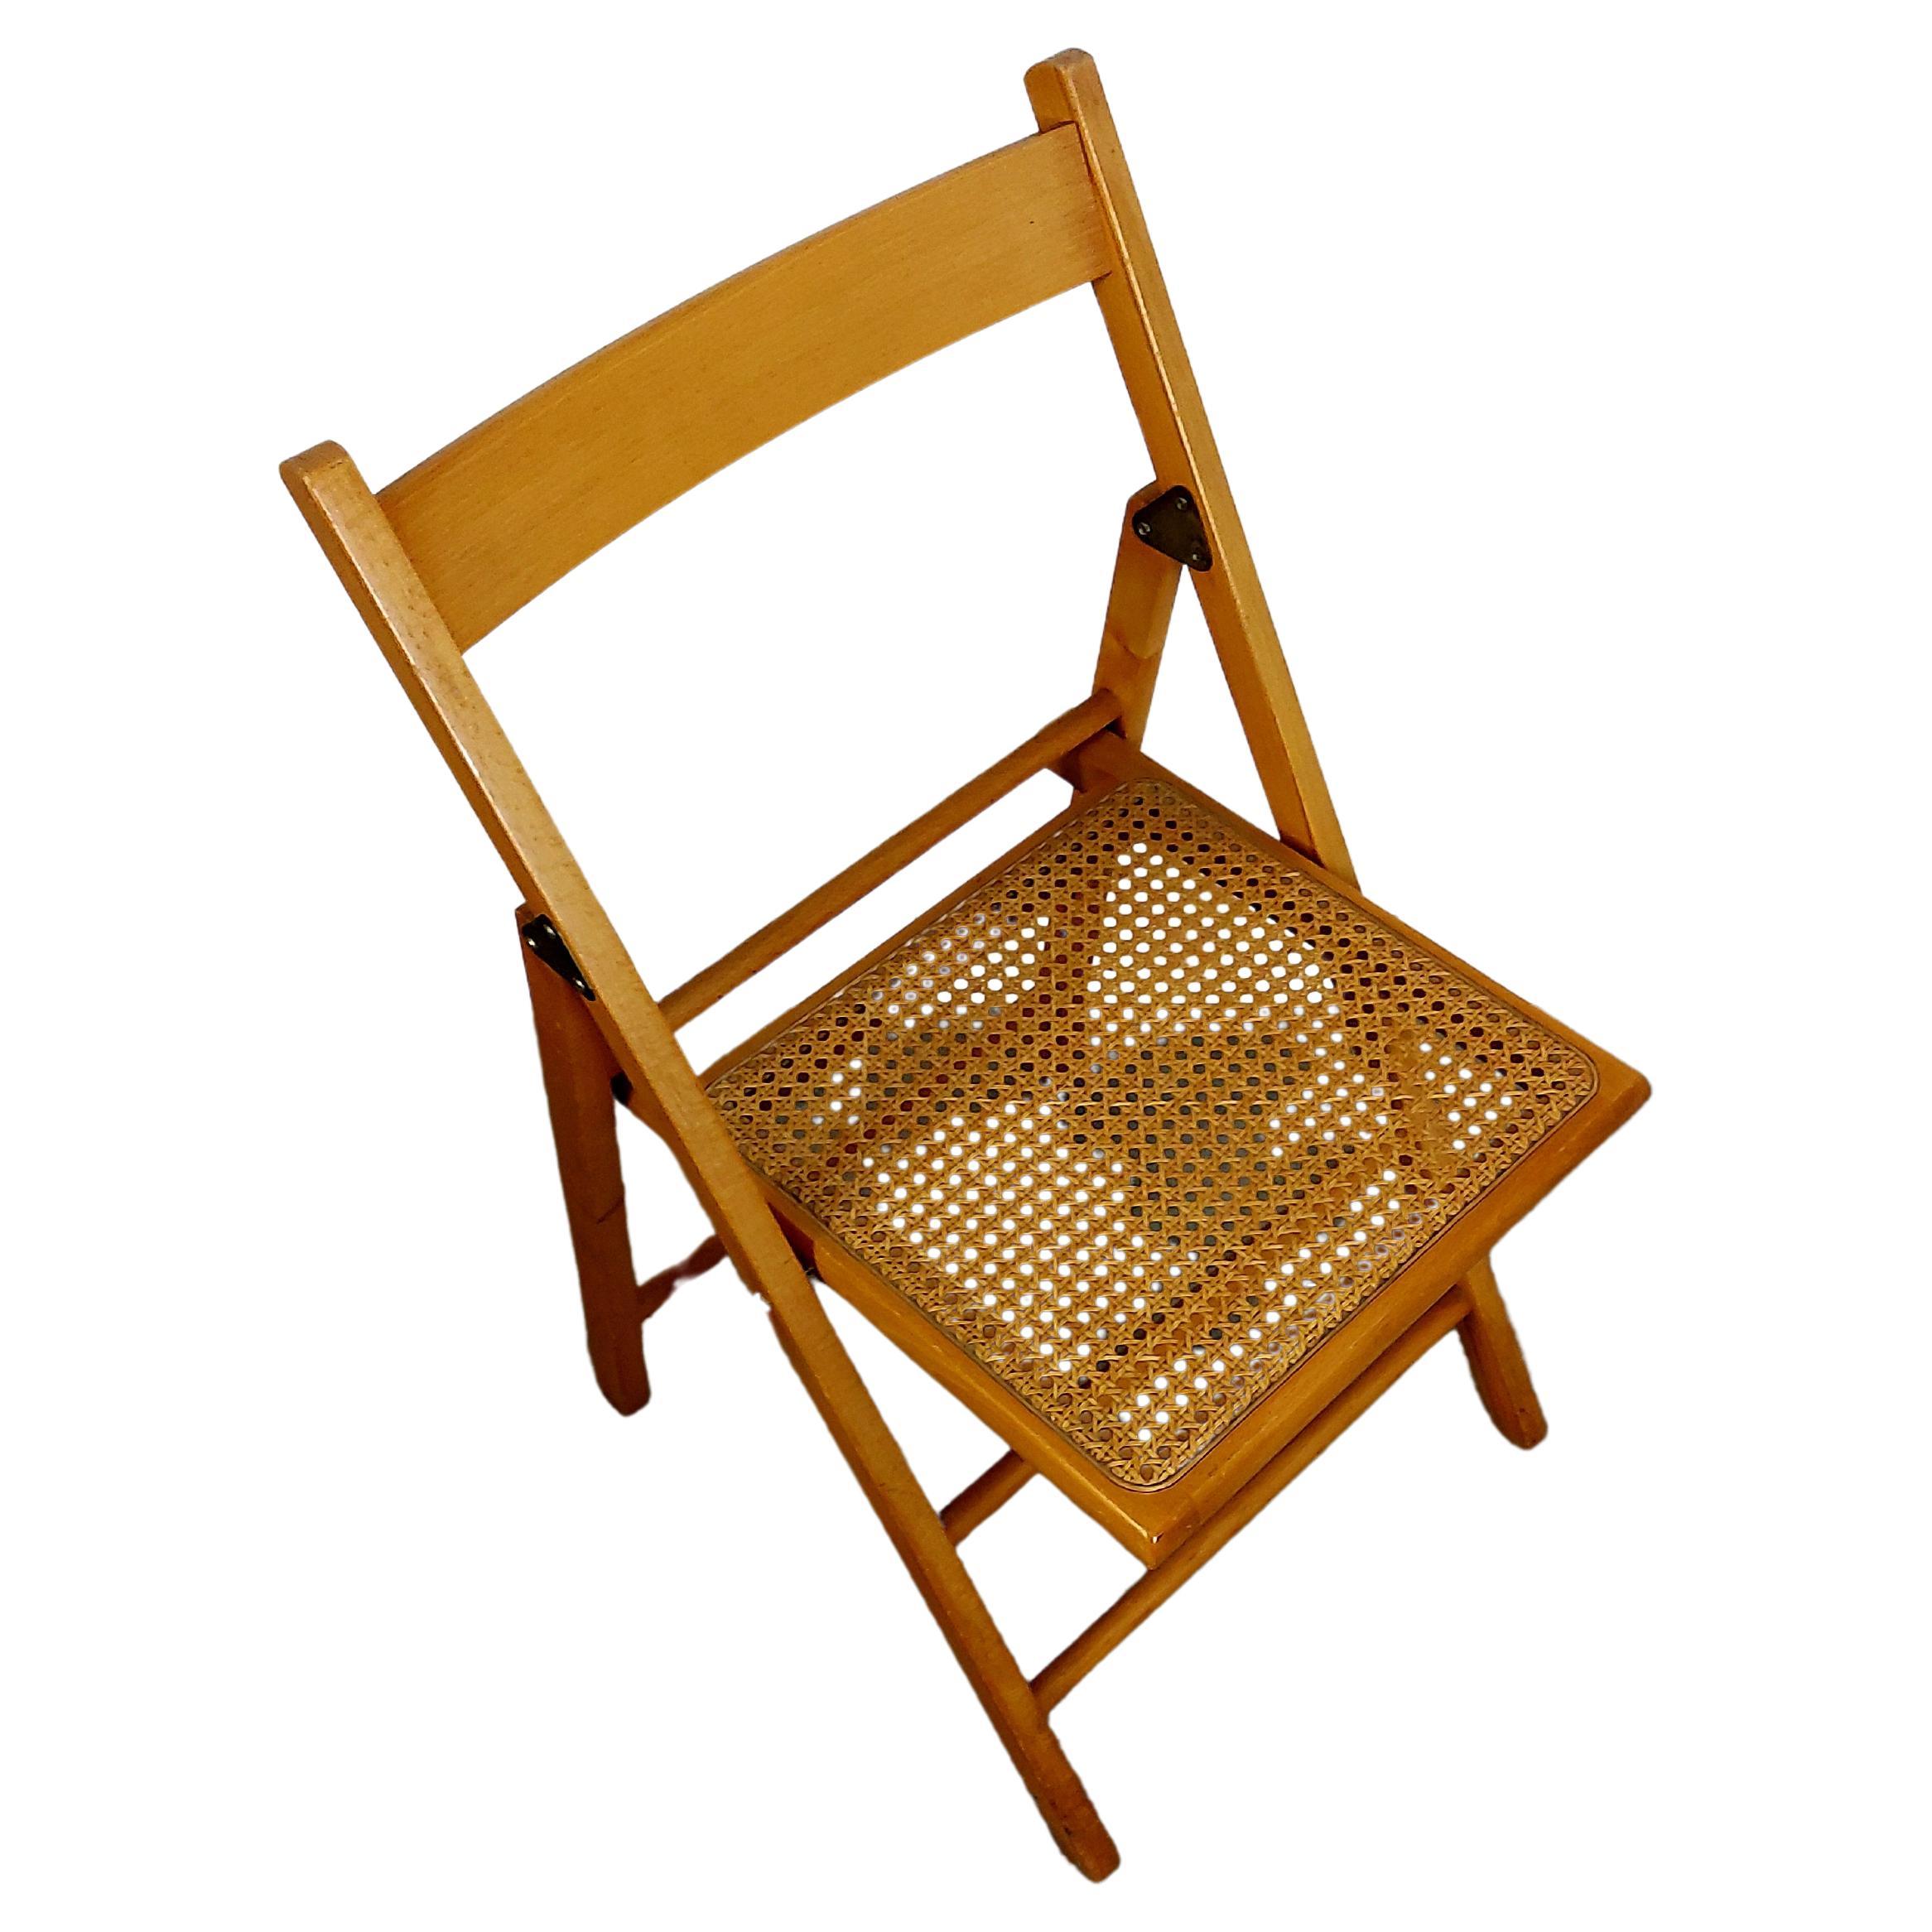 What is the most comfortable folding chair?